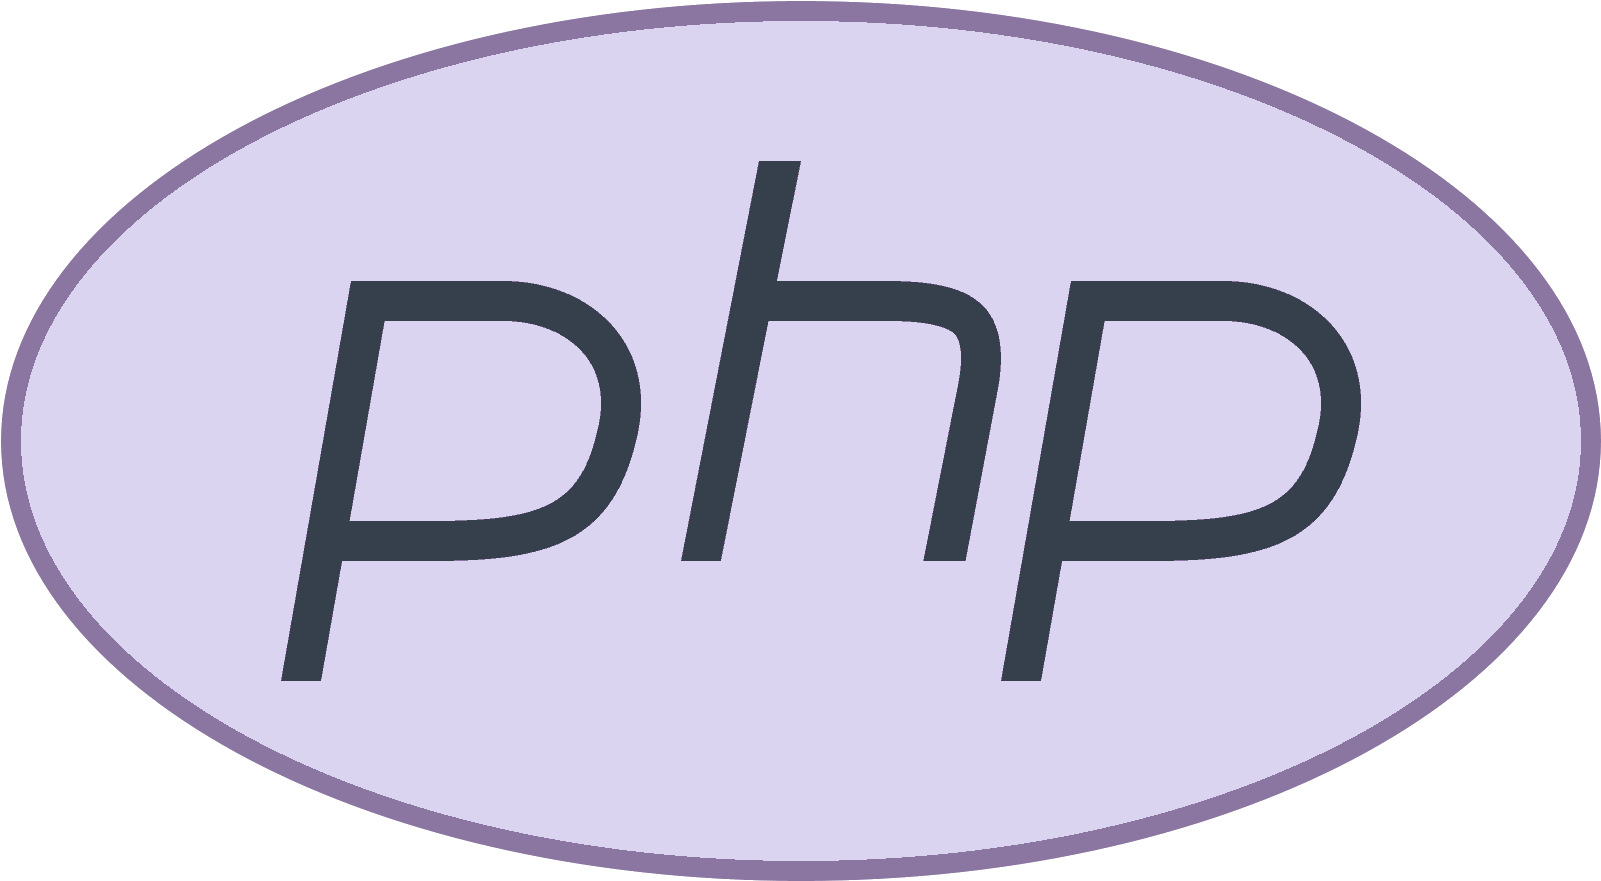 Php Logo Png - Php Icon Png Download (1600x1600), Png Download